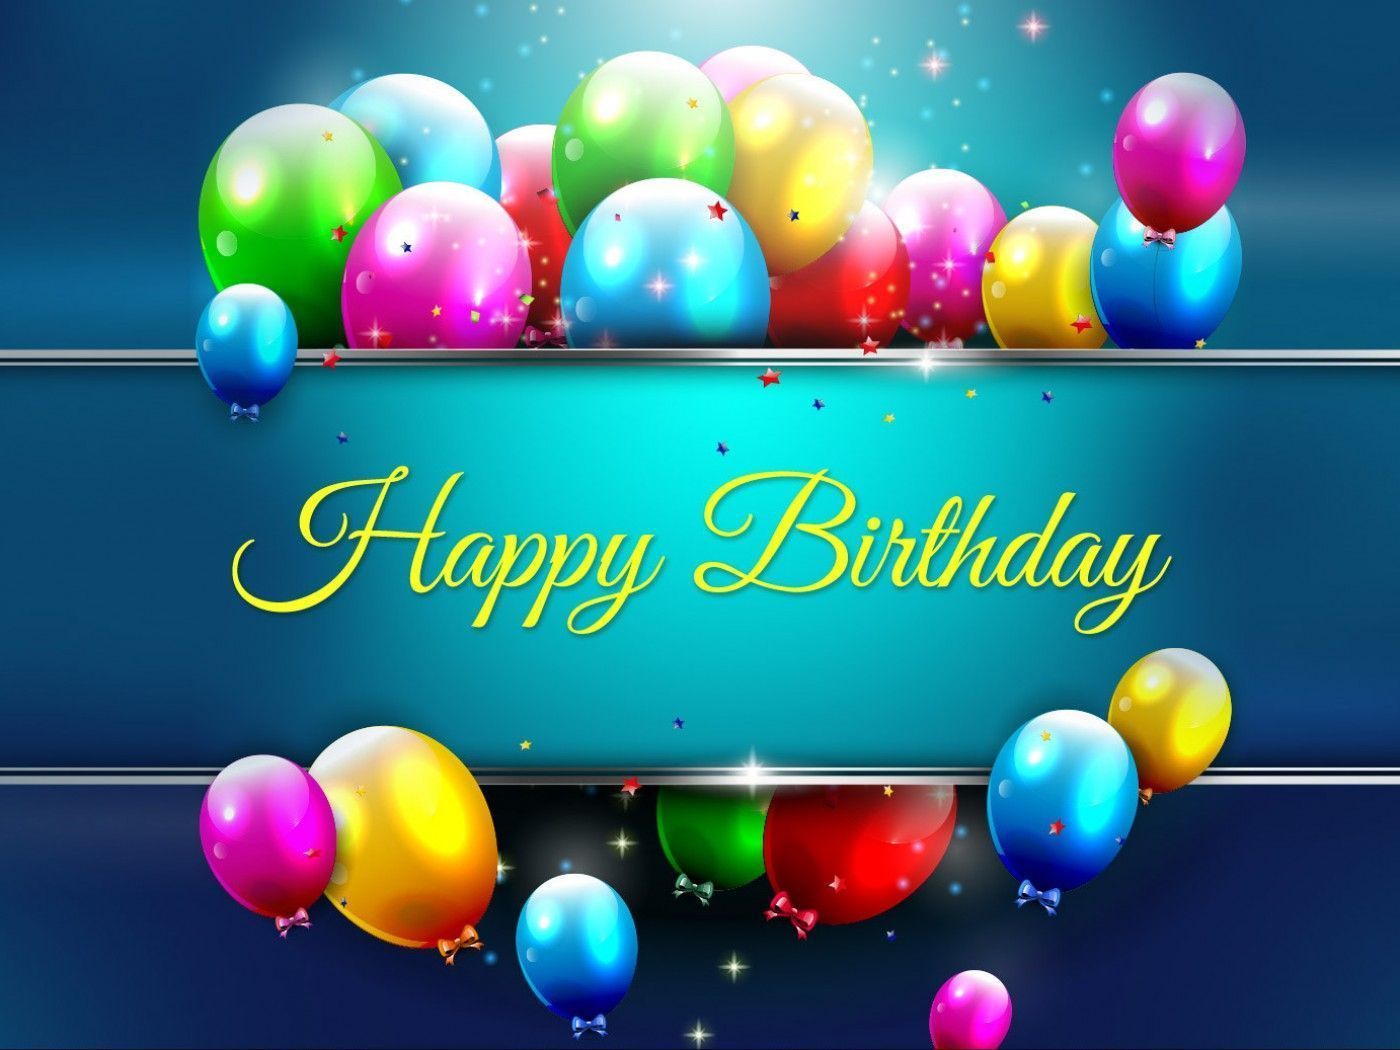 Happy Birthday Wallpaper Images - Wallpaper Cave